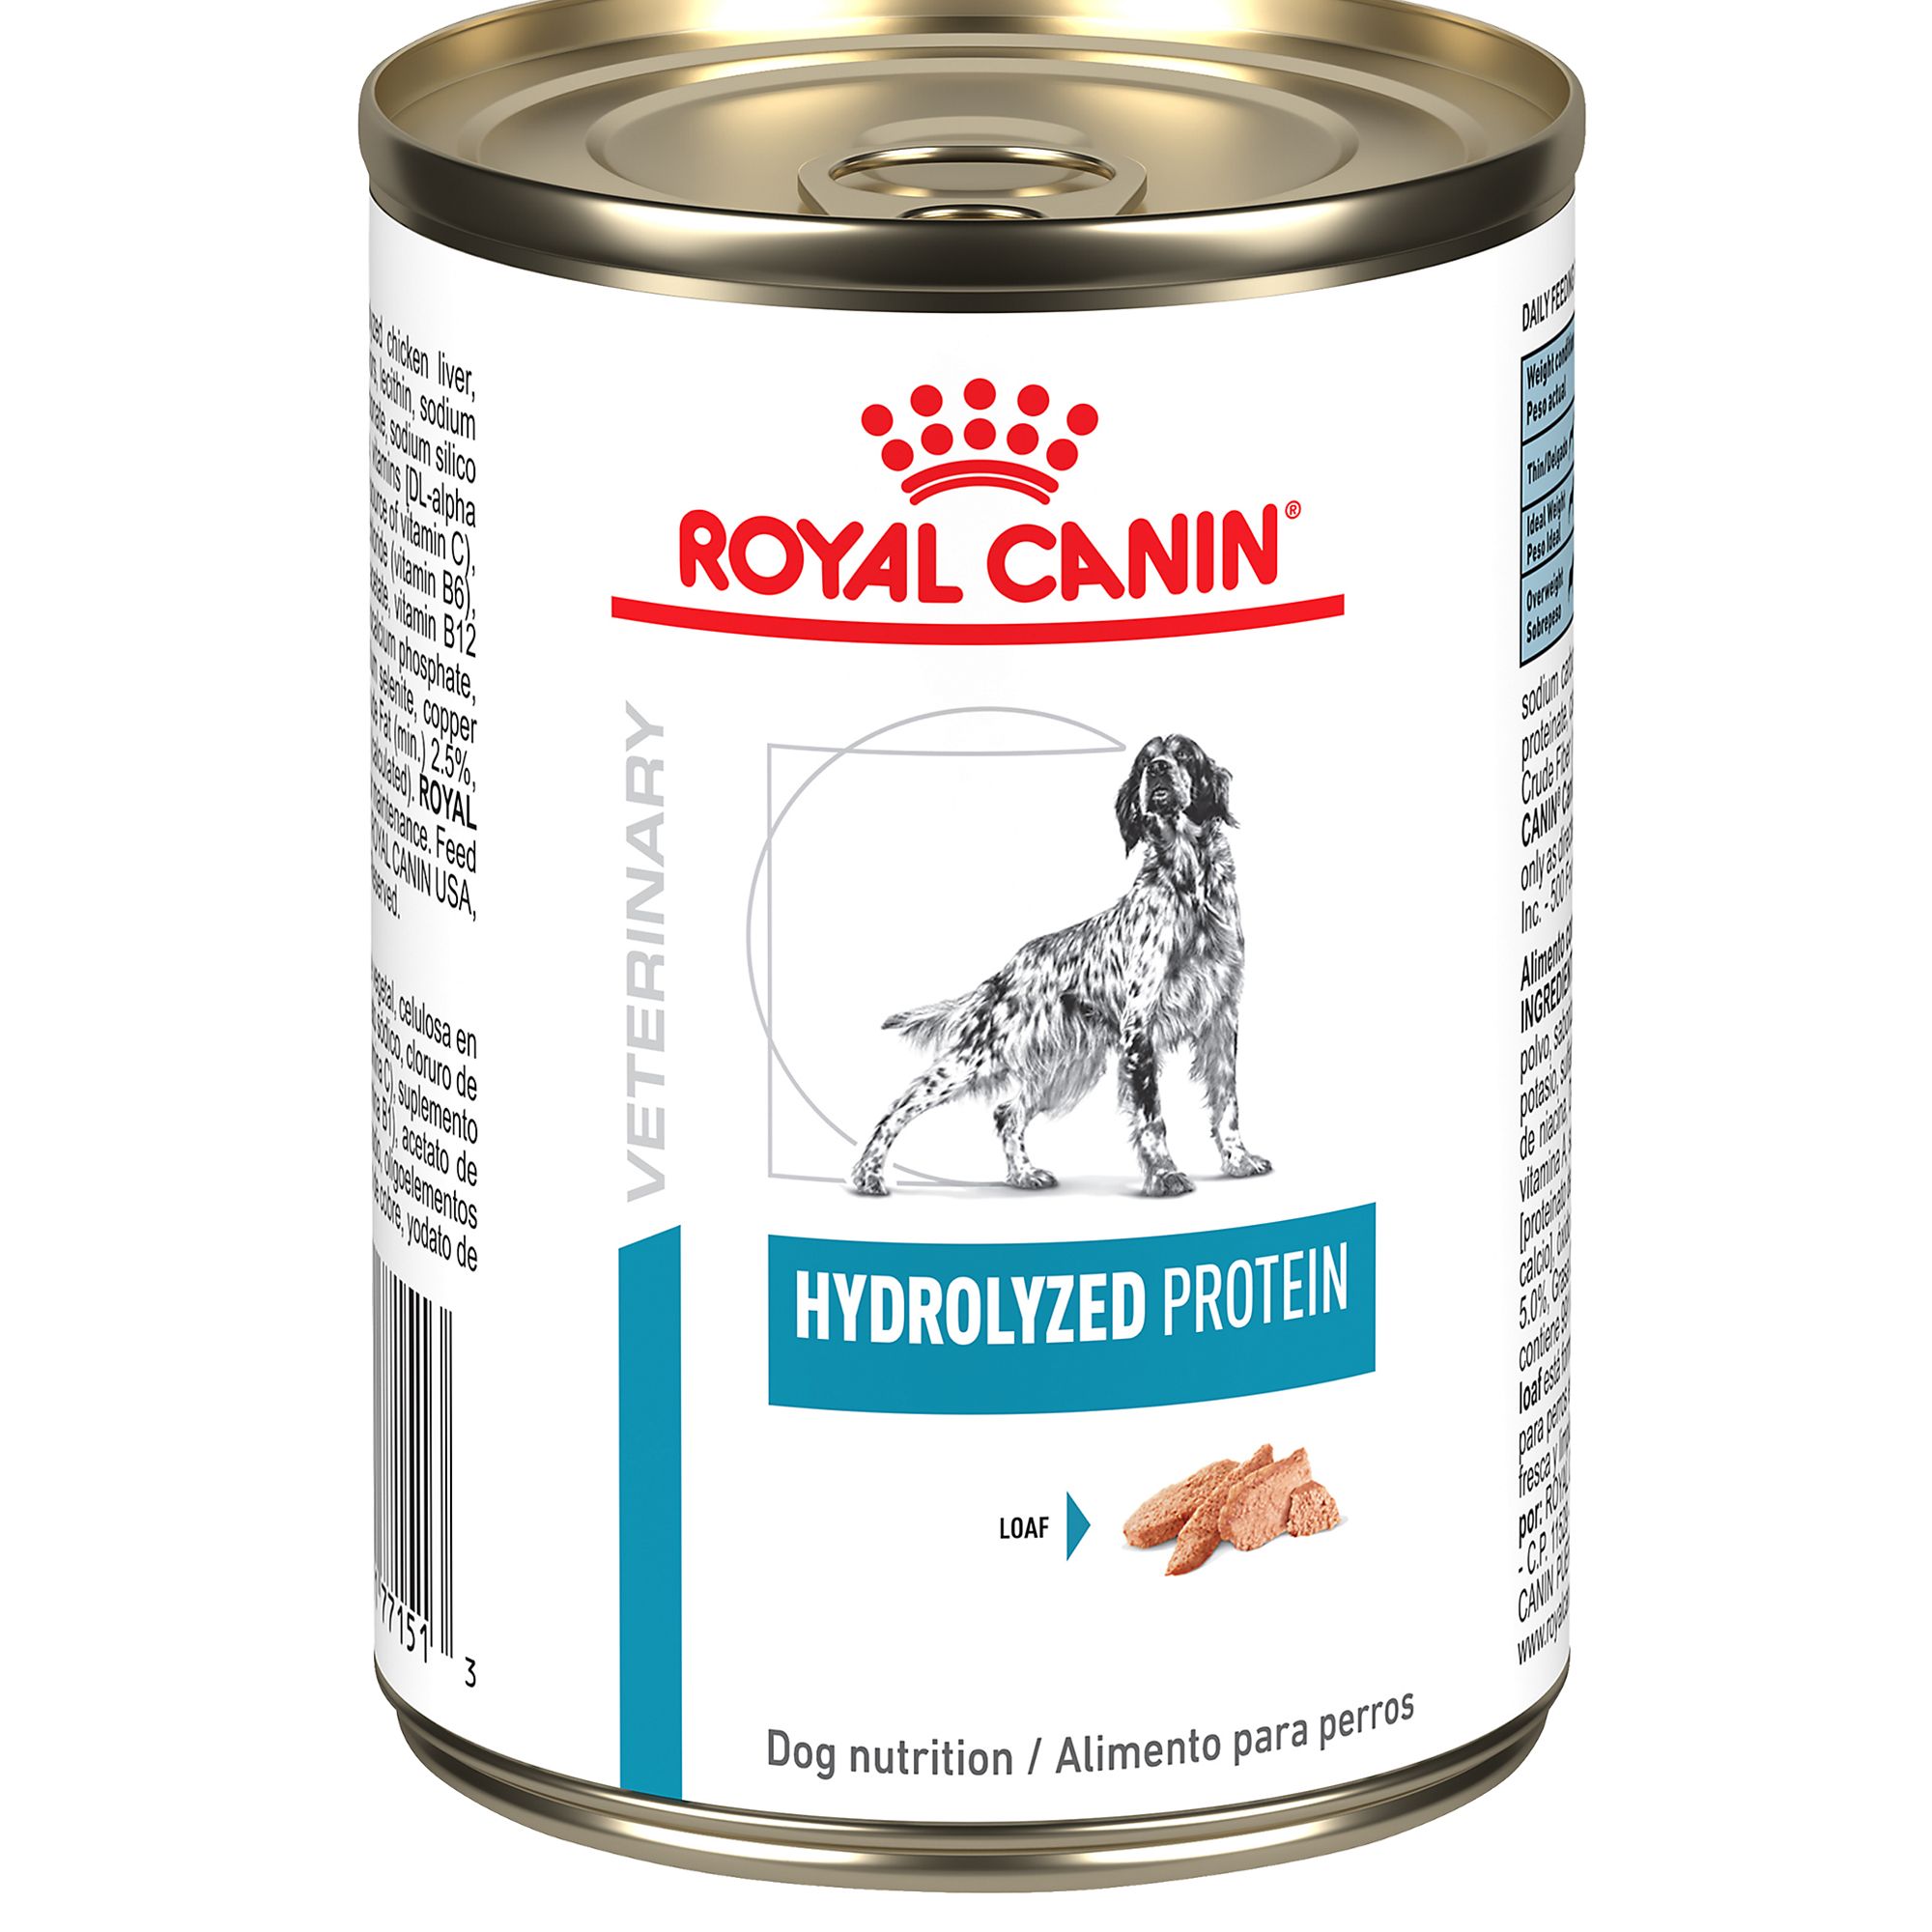 Royal Canin Hydrolyzed Protein Cat Food Reviews